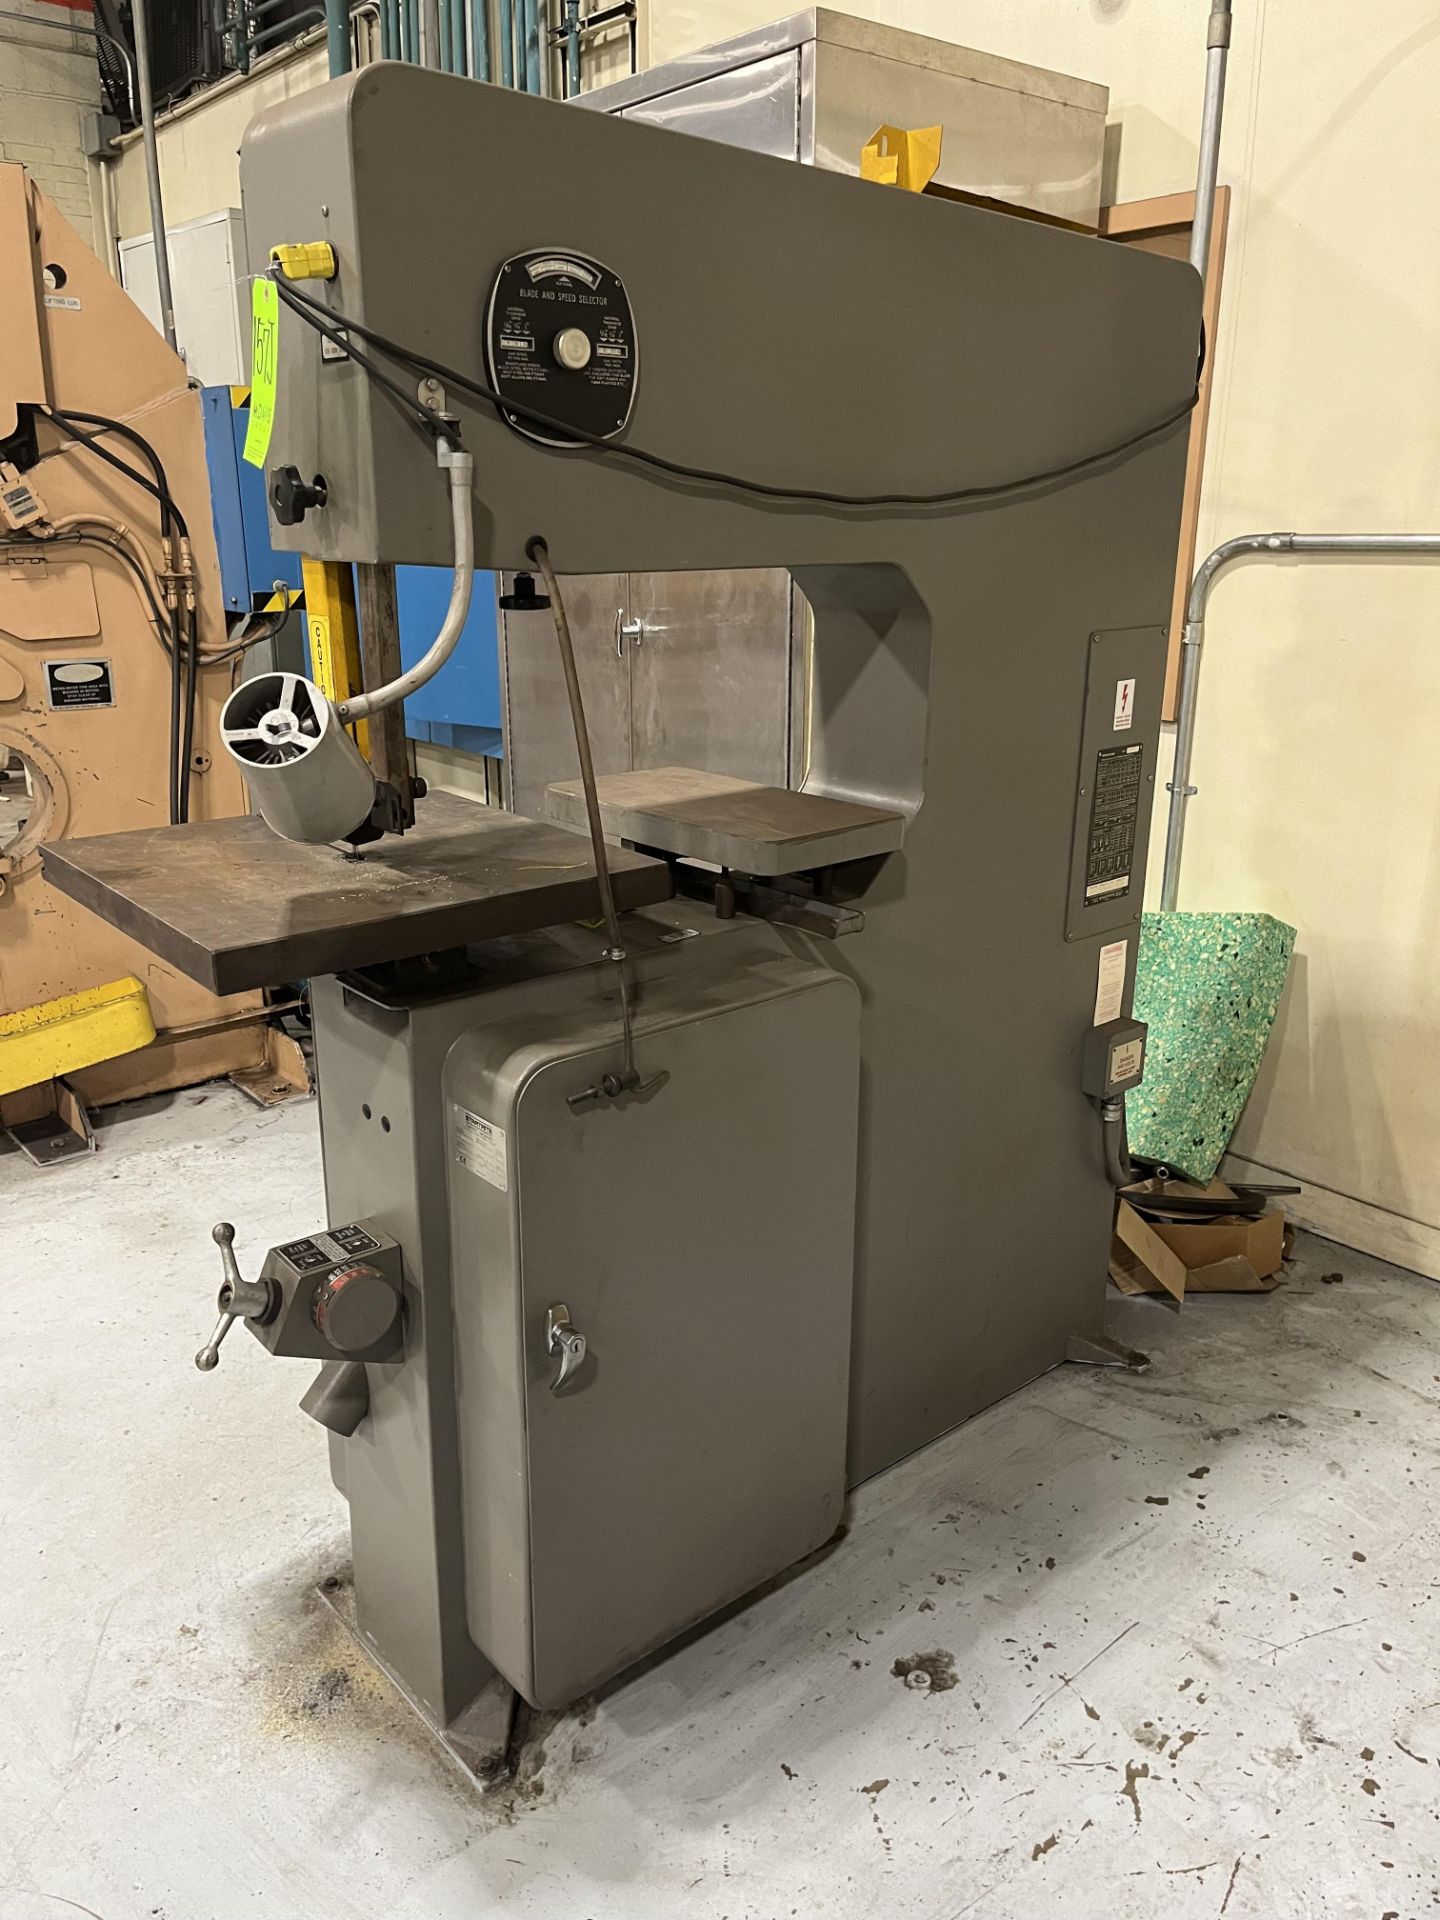 STARTRITE VERTICAL BANDSAW MODEL 30RWS SERIAL NO. 204145 YEAR 2000 VOLTS: 440 THREE PHASE HZ 60 AMPS